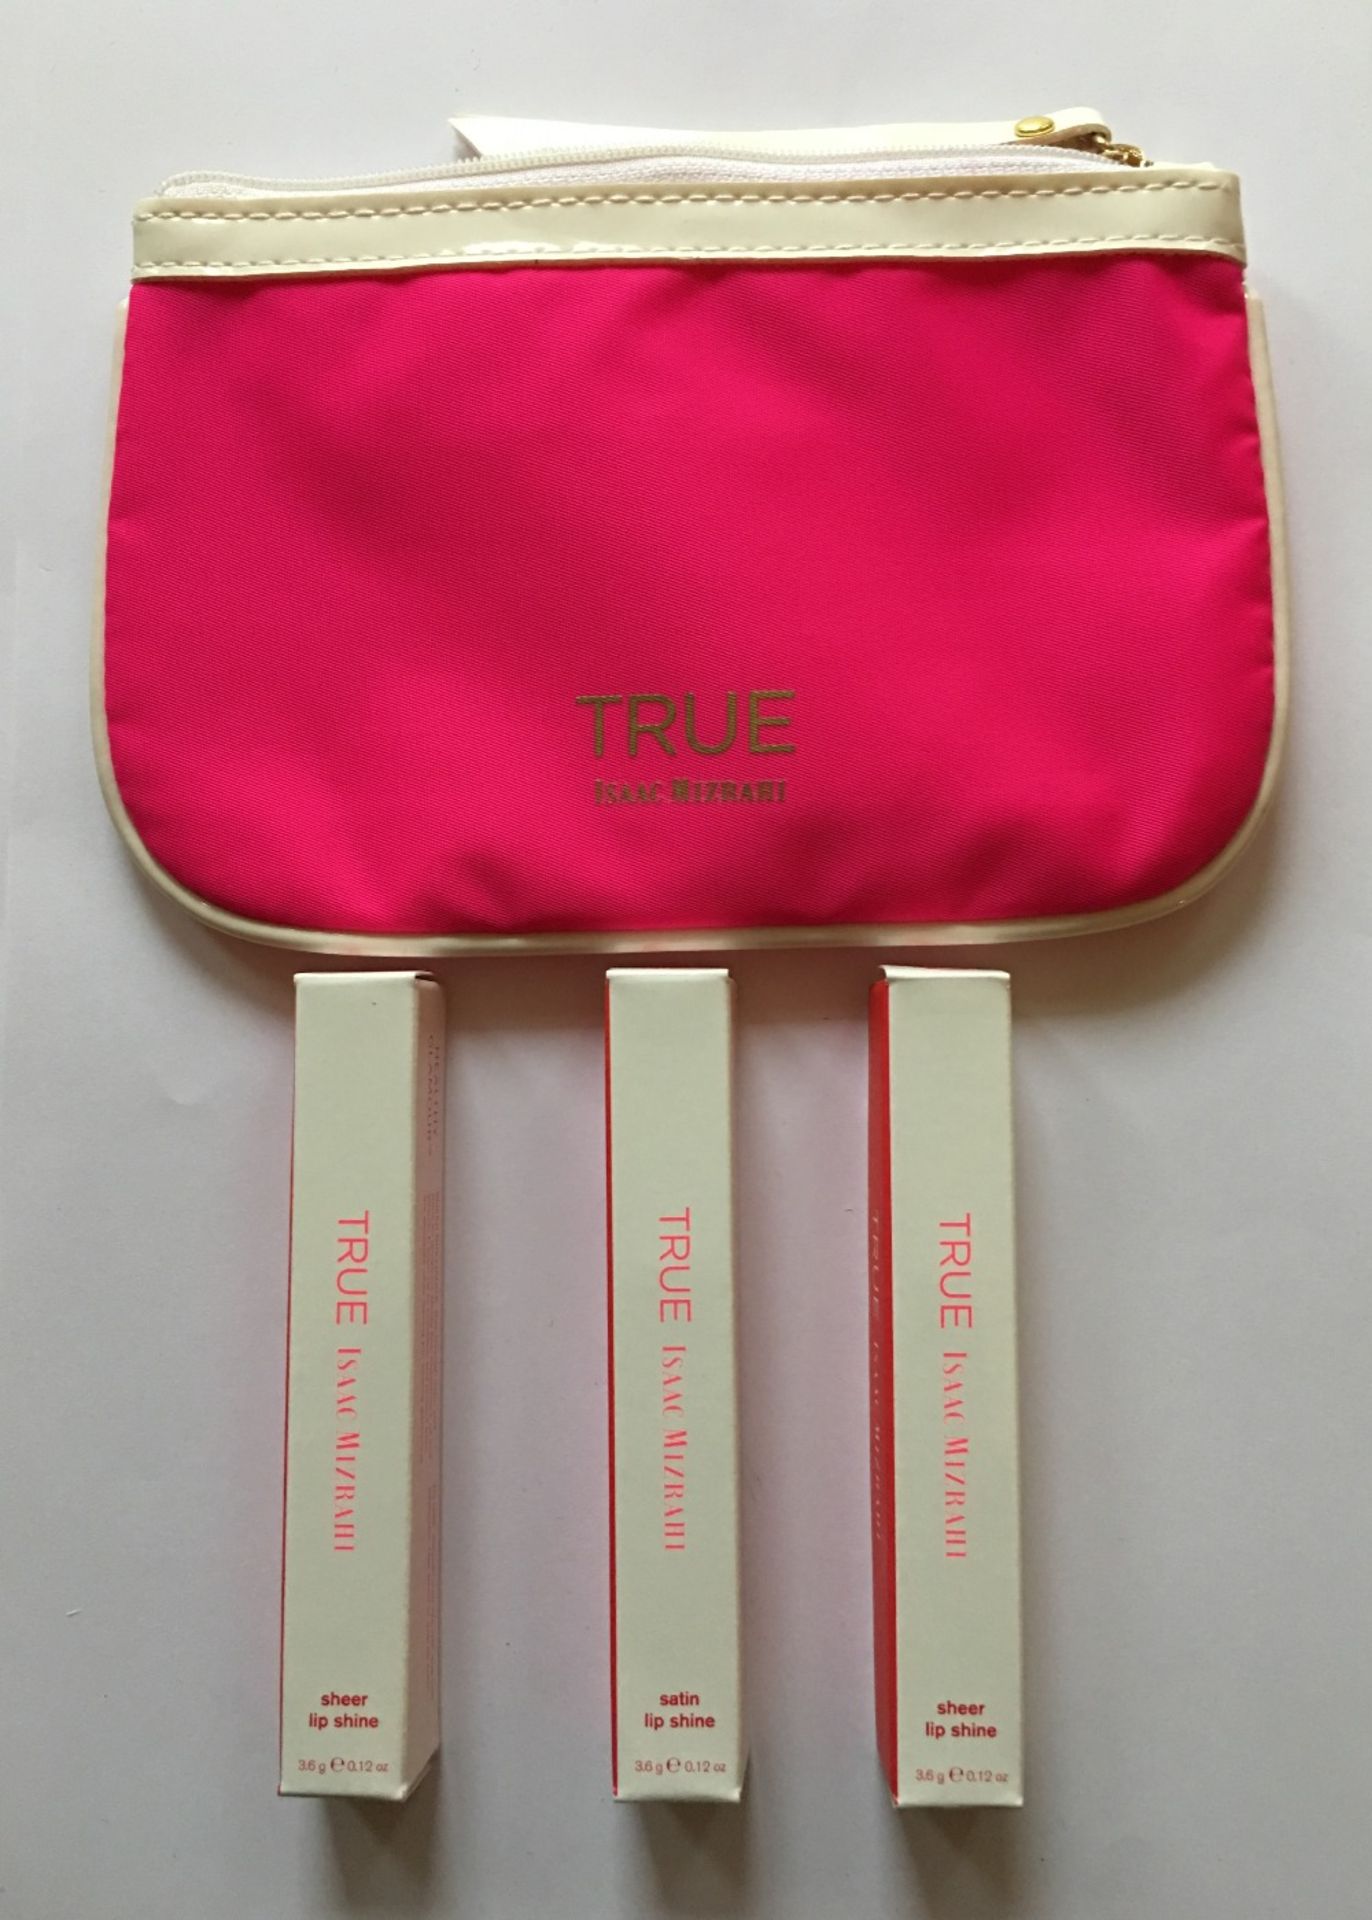 100 x True by issac Mizrahi 3 item gift set –12 - Each set is individually packed in a padded